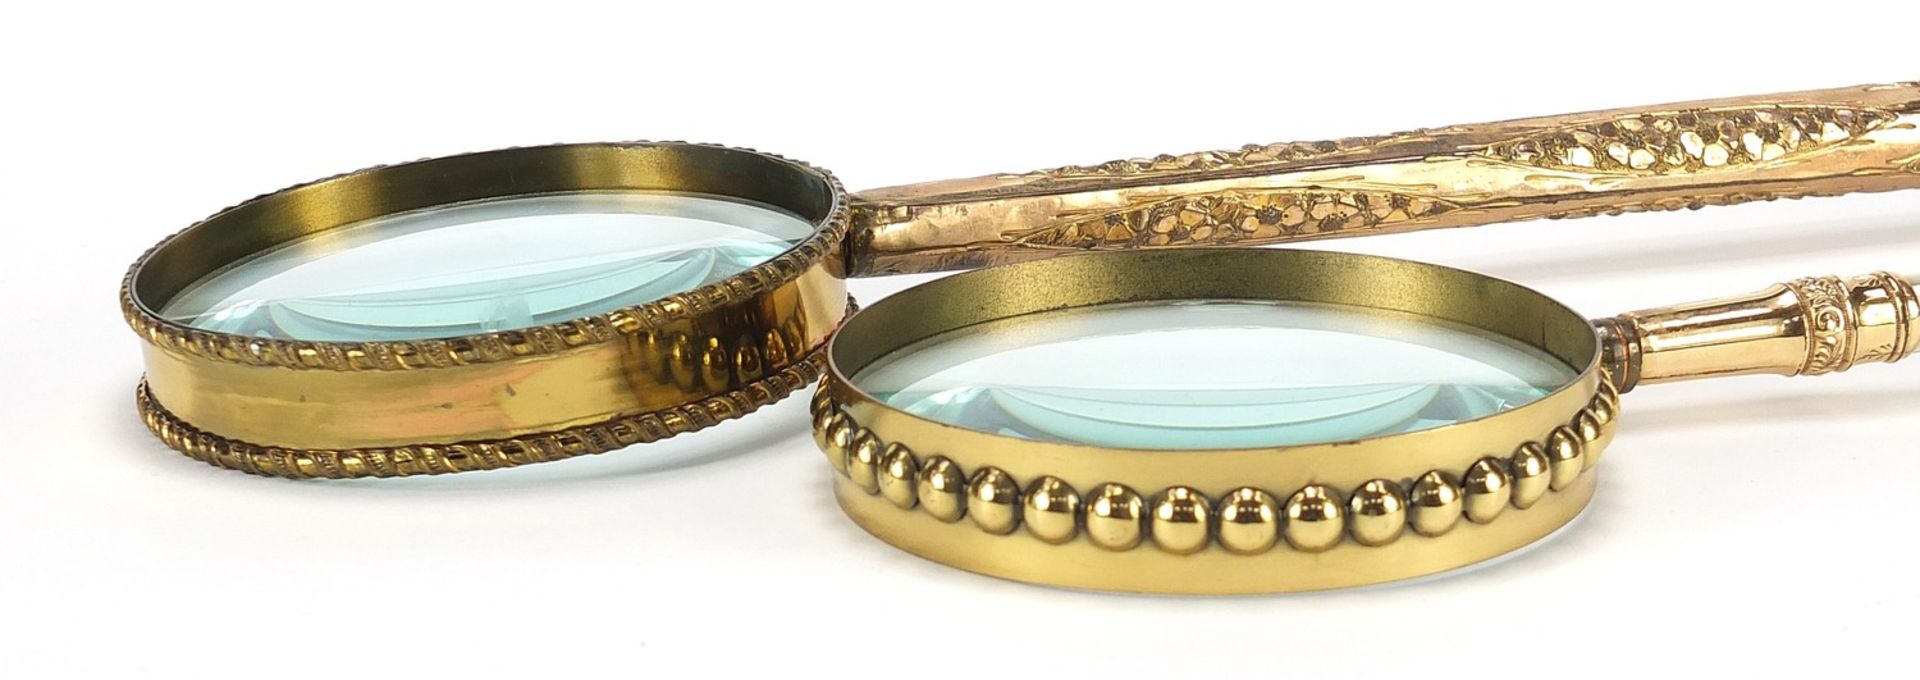 Two large antique gilt metal magnifying glasses including one with mother of pearl handles, the - Image 4 of 4